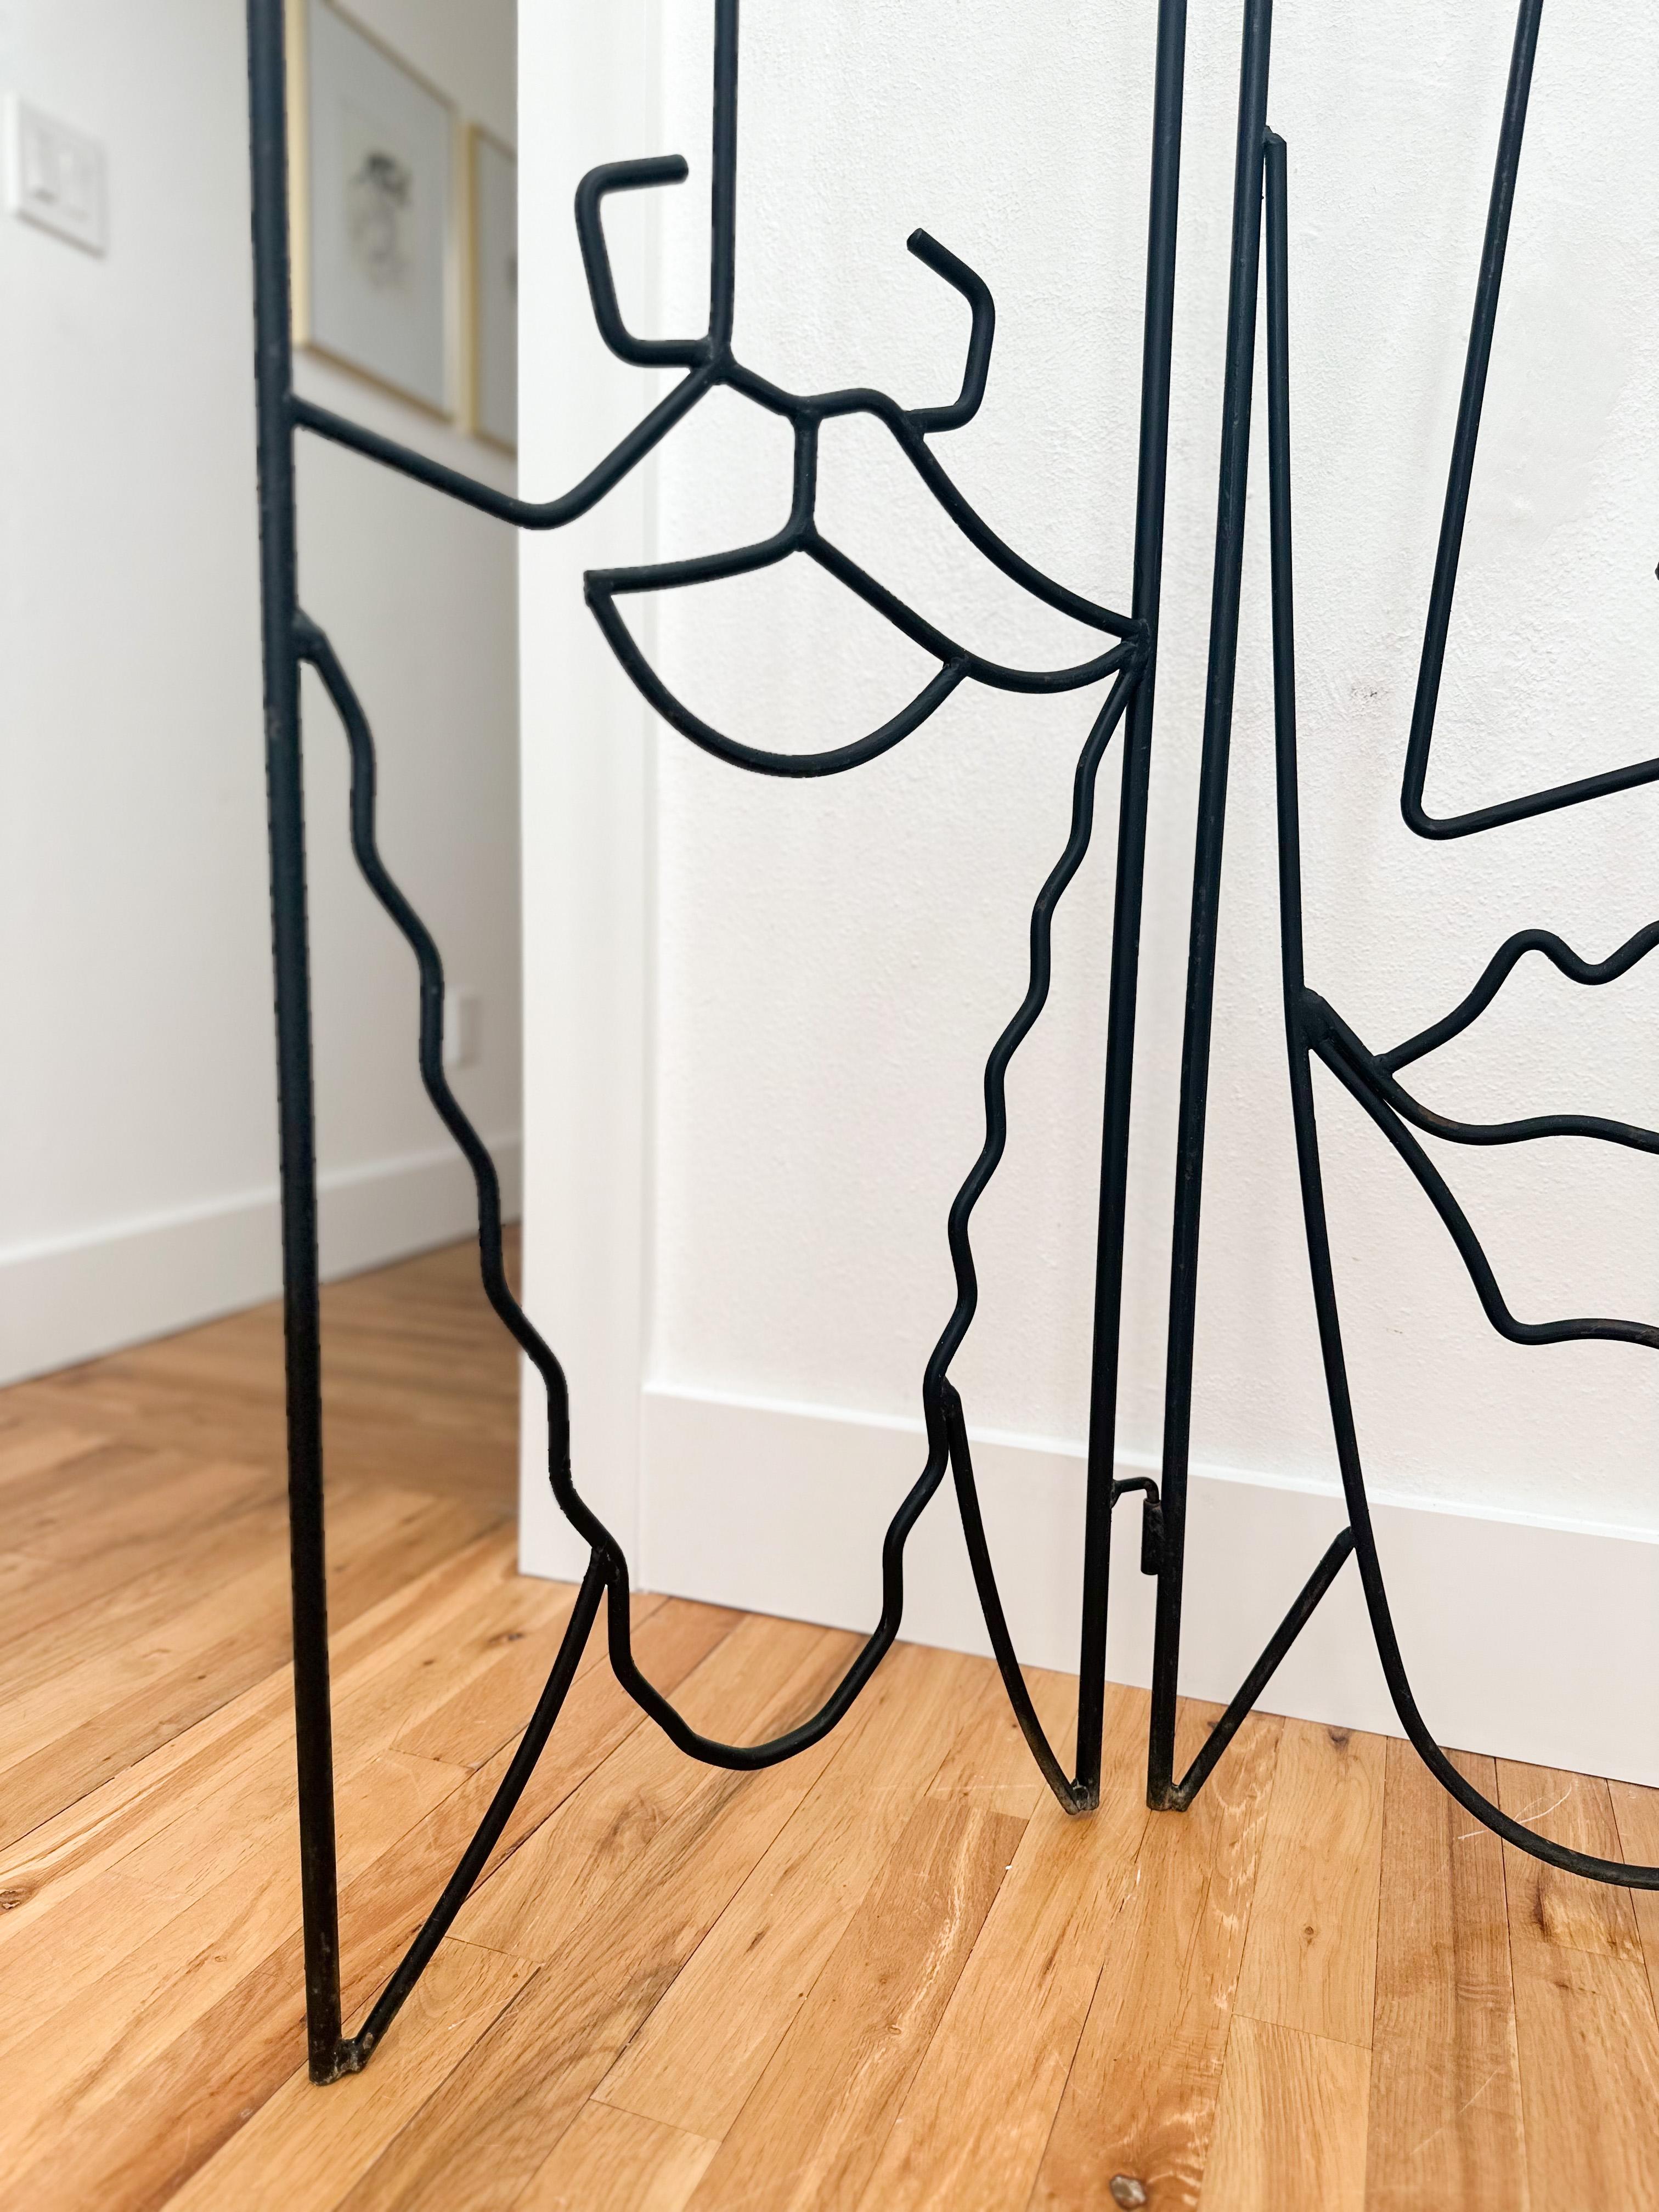 Whimsical sculptural room divider screen in the style of metal artist John Risley, c.1970s. Three enameled steel rod panels depict a man and two women, an enigmatic power throuple with long noses and pillowy lips. Risley's figurative welded designs